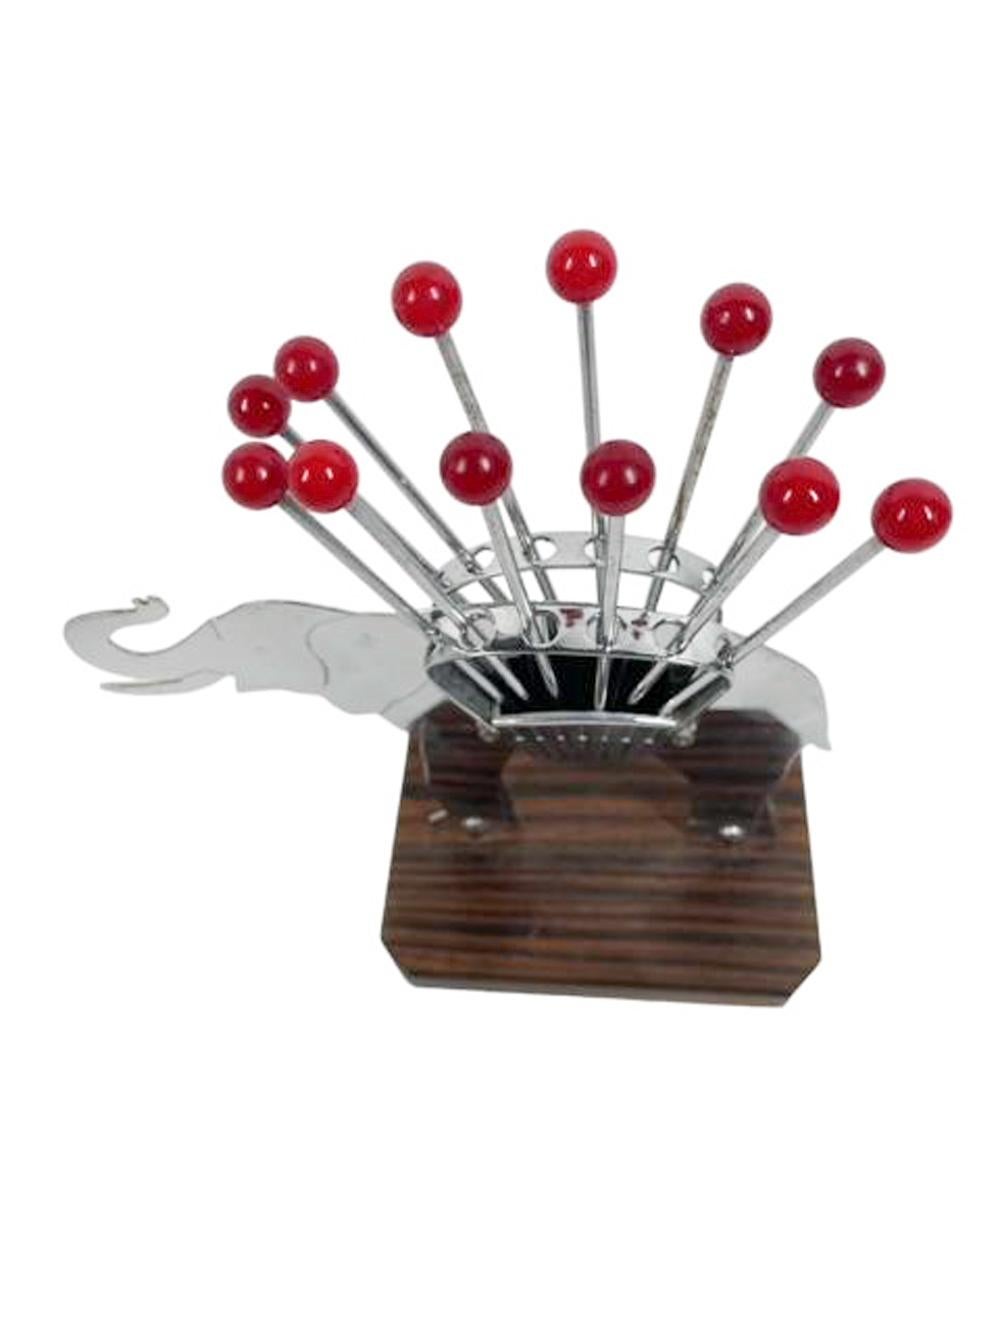 Art Deco cocktail pick set in chrome and wood with red ball topped picks with forked tips. Two-dimensional chromed elephant figure standing on a   striped wood base carrying a pair of baskets, each holding six picks.